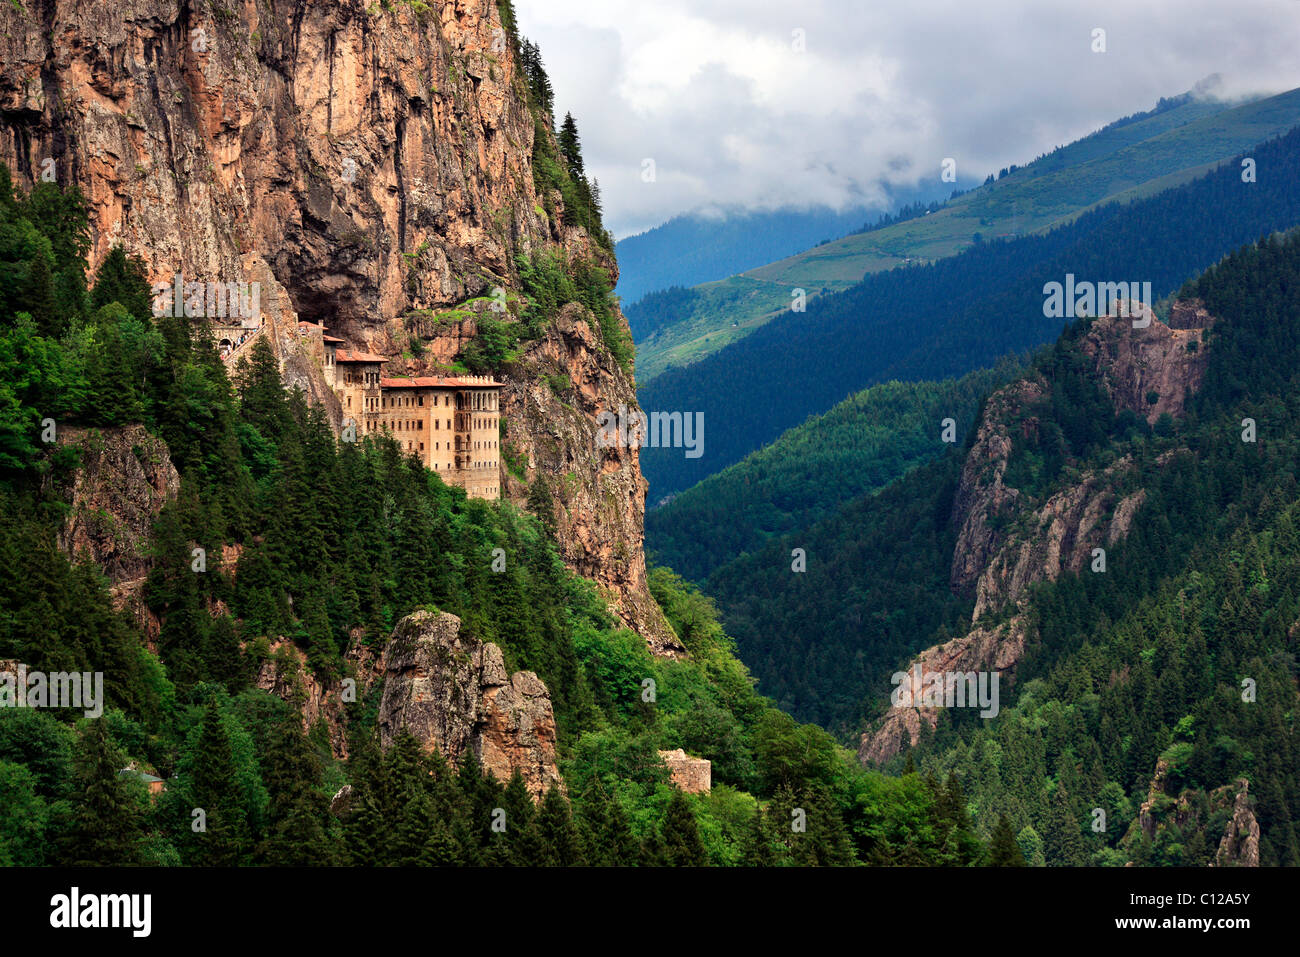 Sumela monastery one of the most impressive sights in the whole Black Sea region, in Altindere Valley, Trabzon province, Turkey. Stock Photo